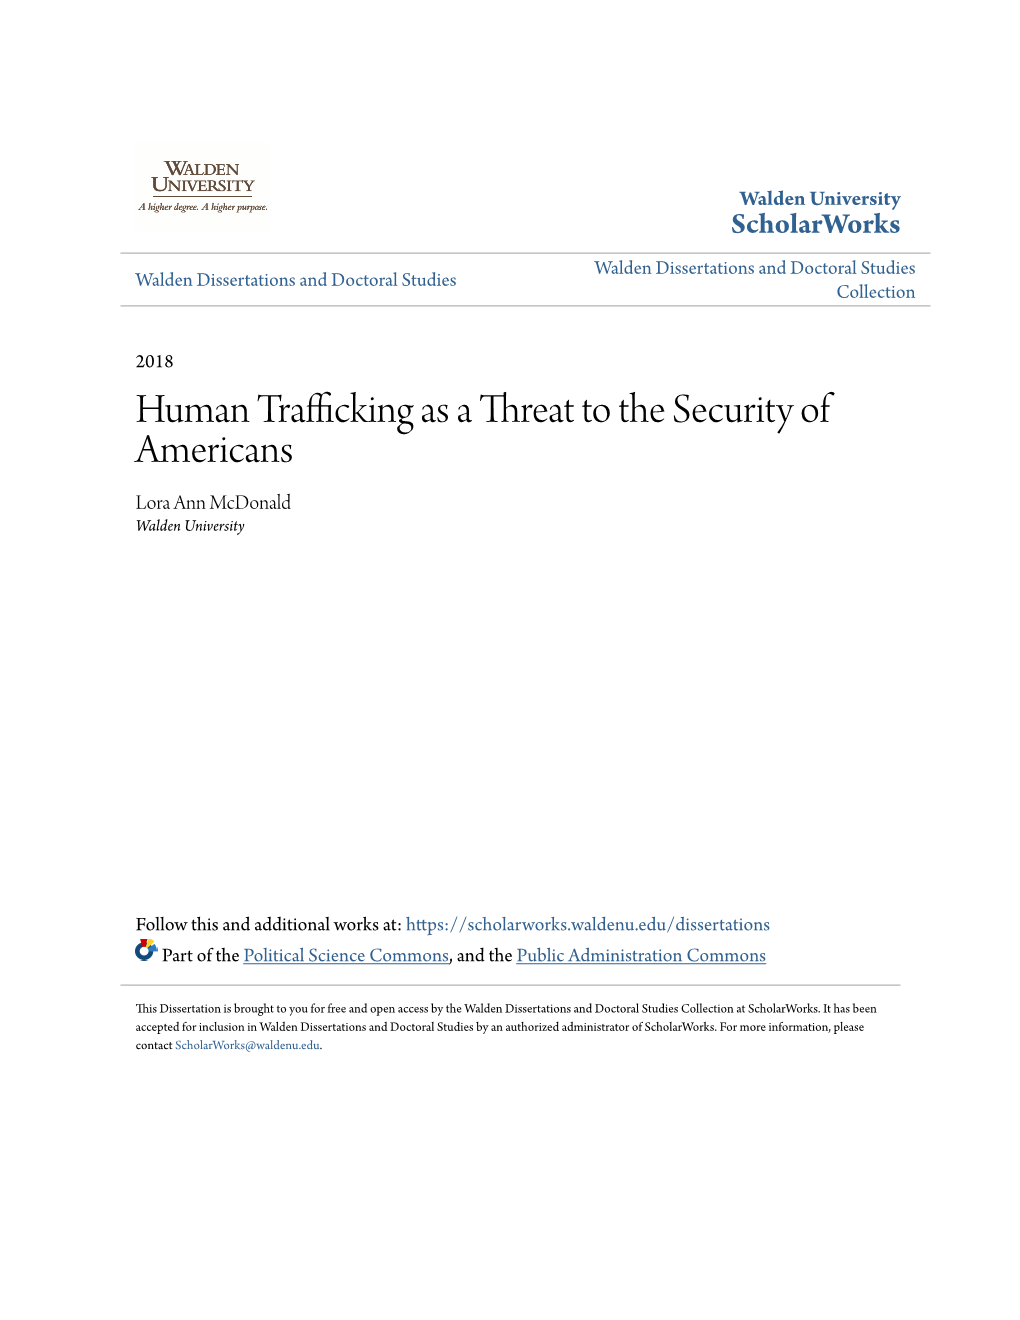 Human Trafficking As a Threat to the Security of Americans Lora Ann Mcdonald Walden University